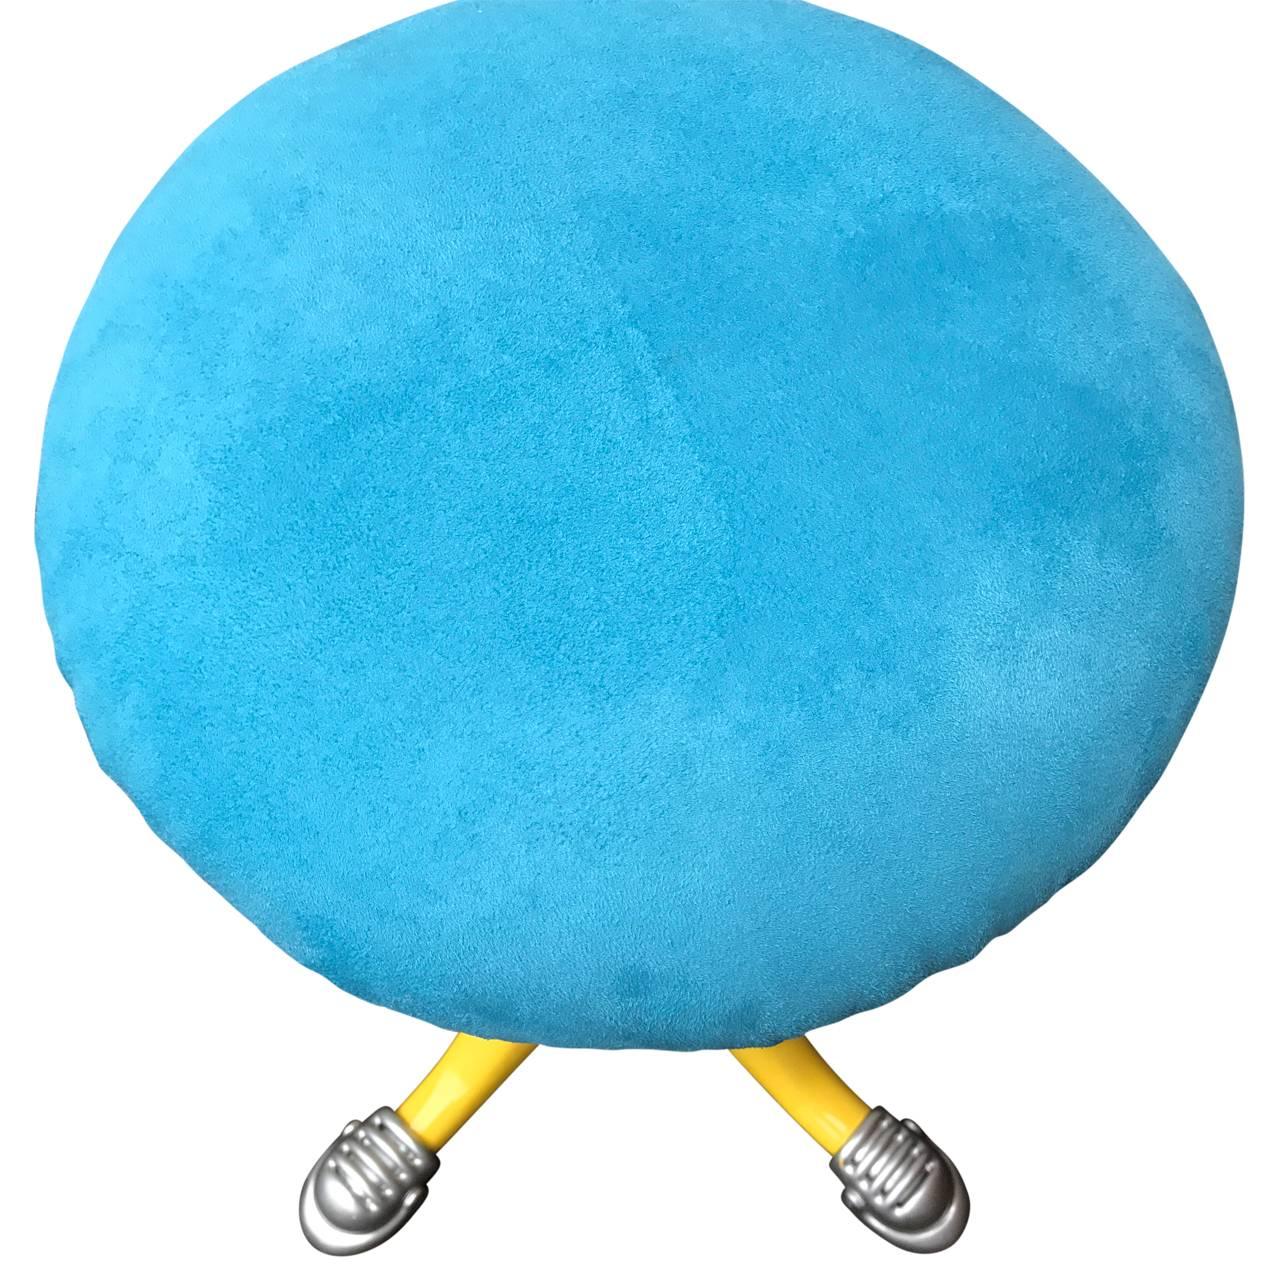 Brushed Industrial Yellow Metal Stool with Faux Blue Suede Seat, circa 1873